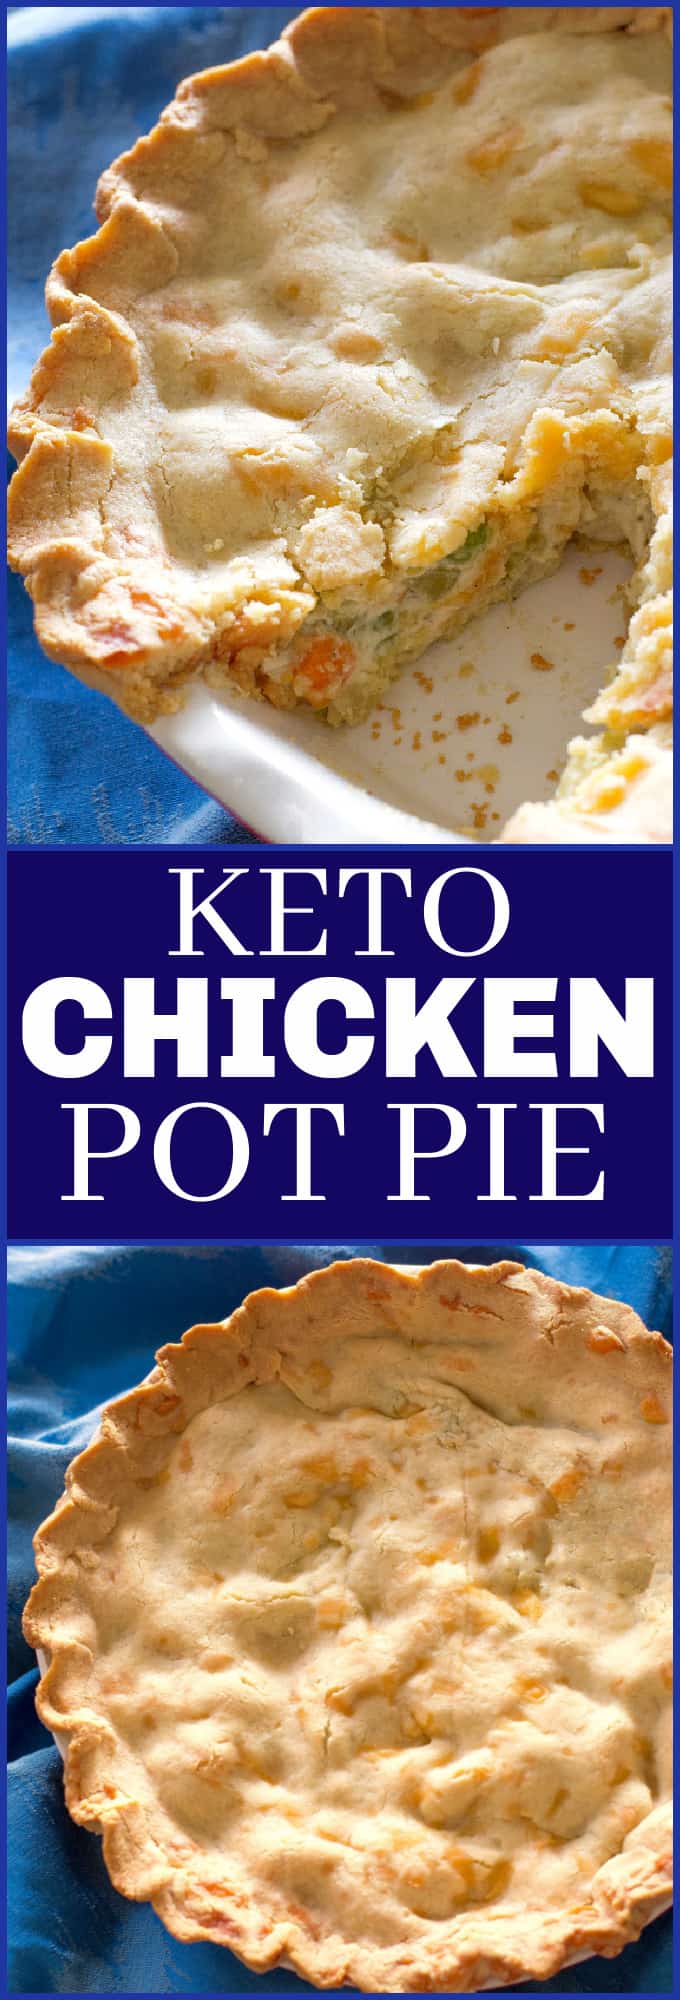 Keto Chicken Pot Pie - The Girl Who Ate Everything